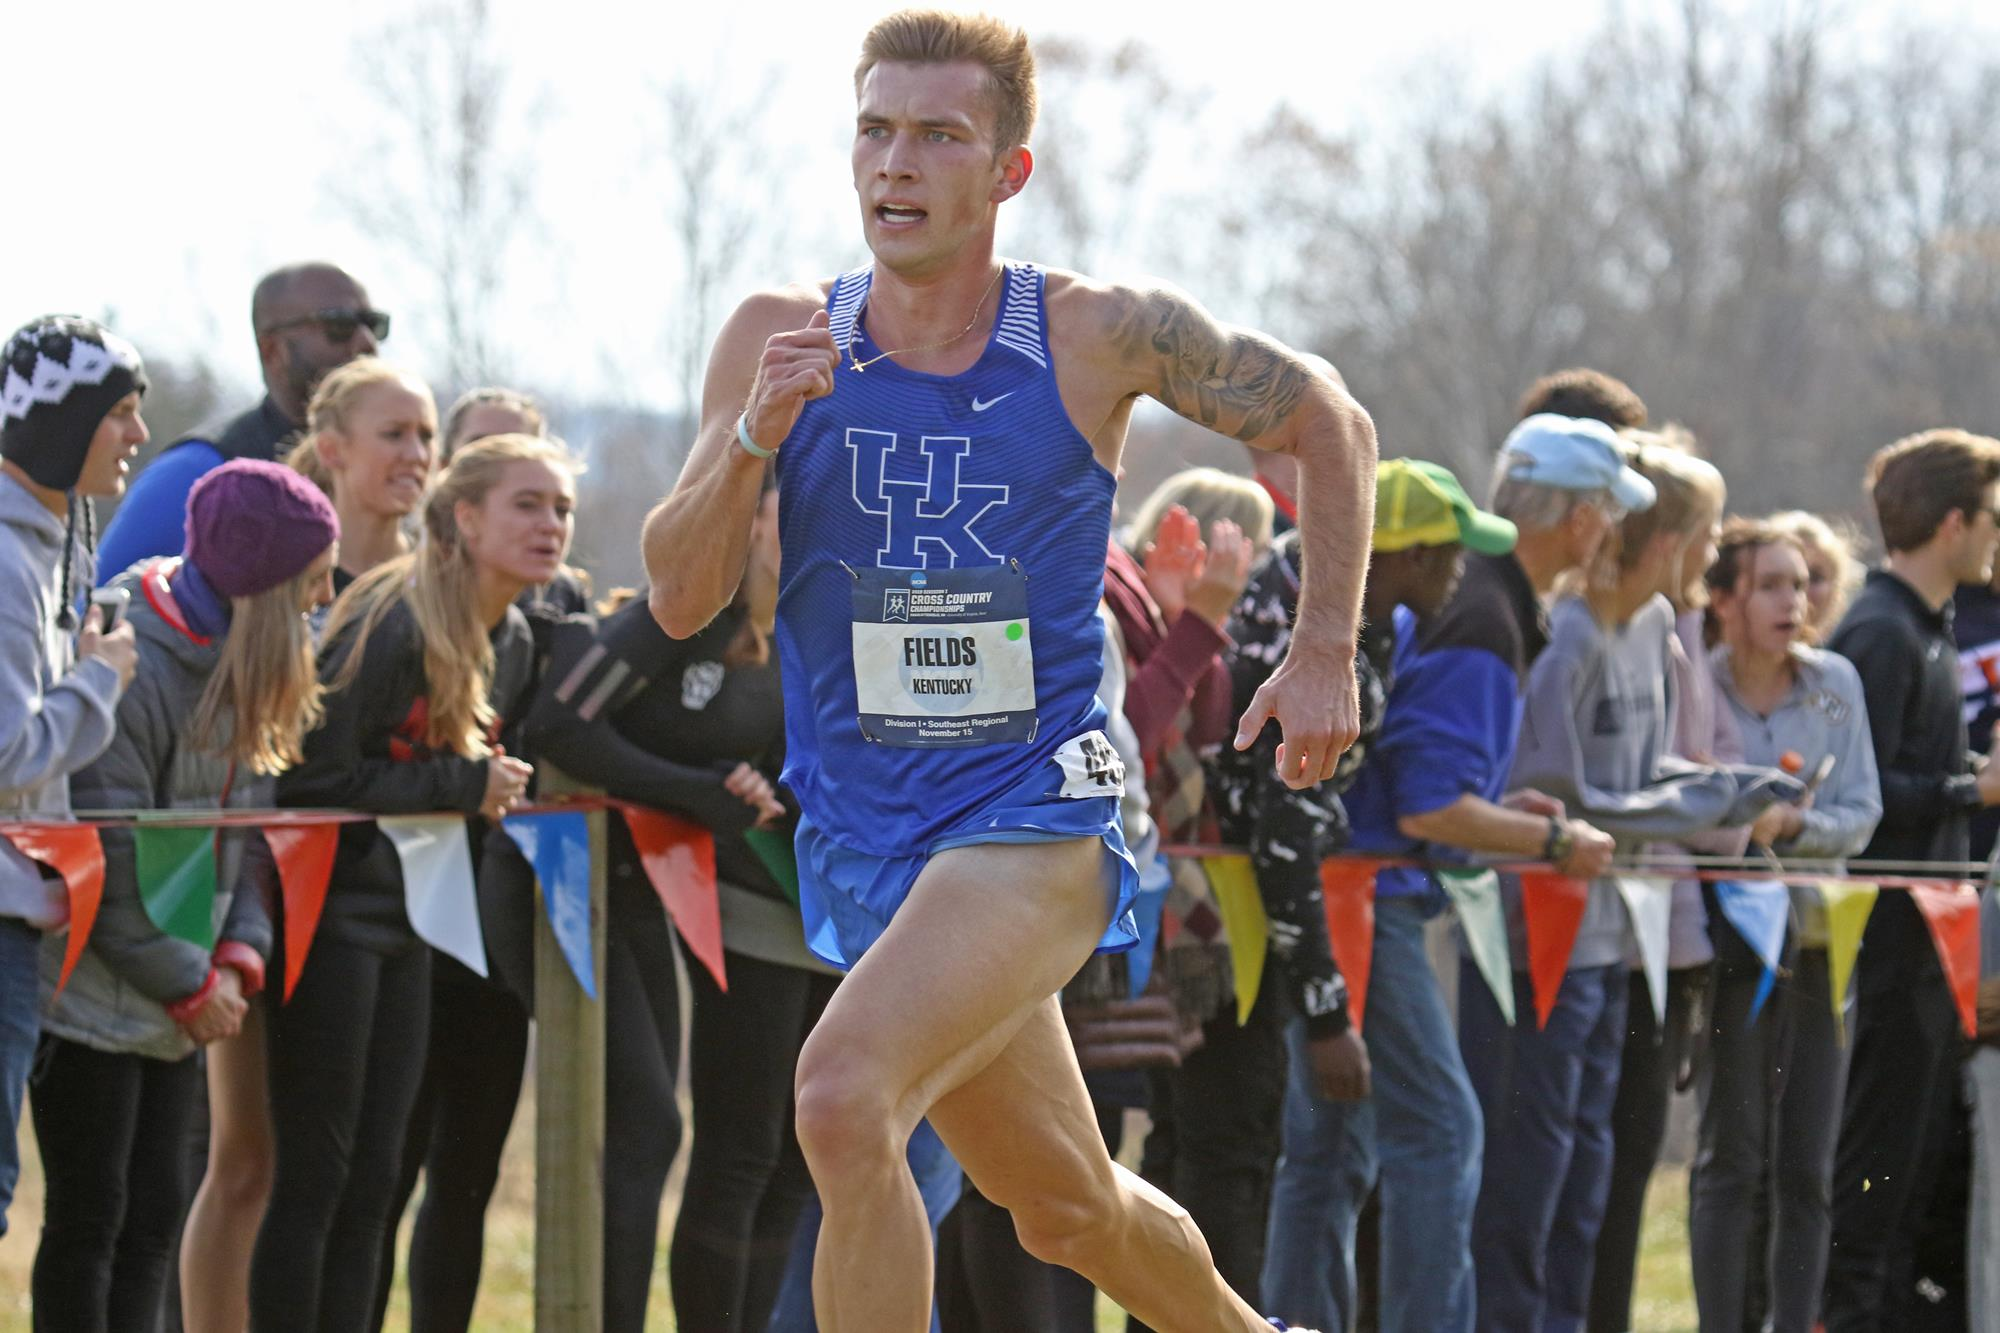 Kentucky Cross Country Finishes 8th and 13th at NCAA Southeast Regional Championships